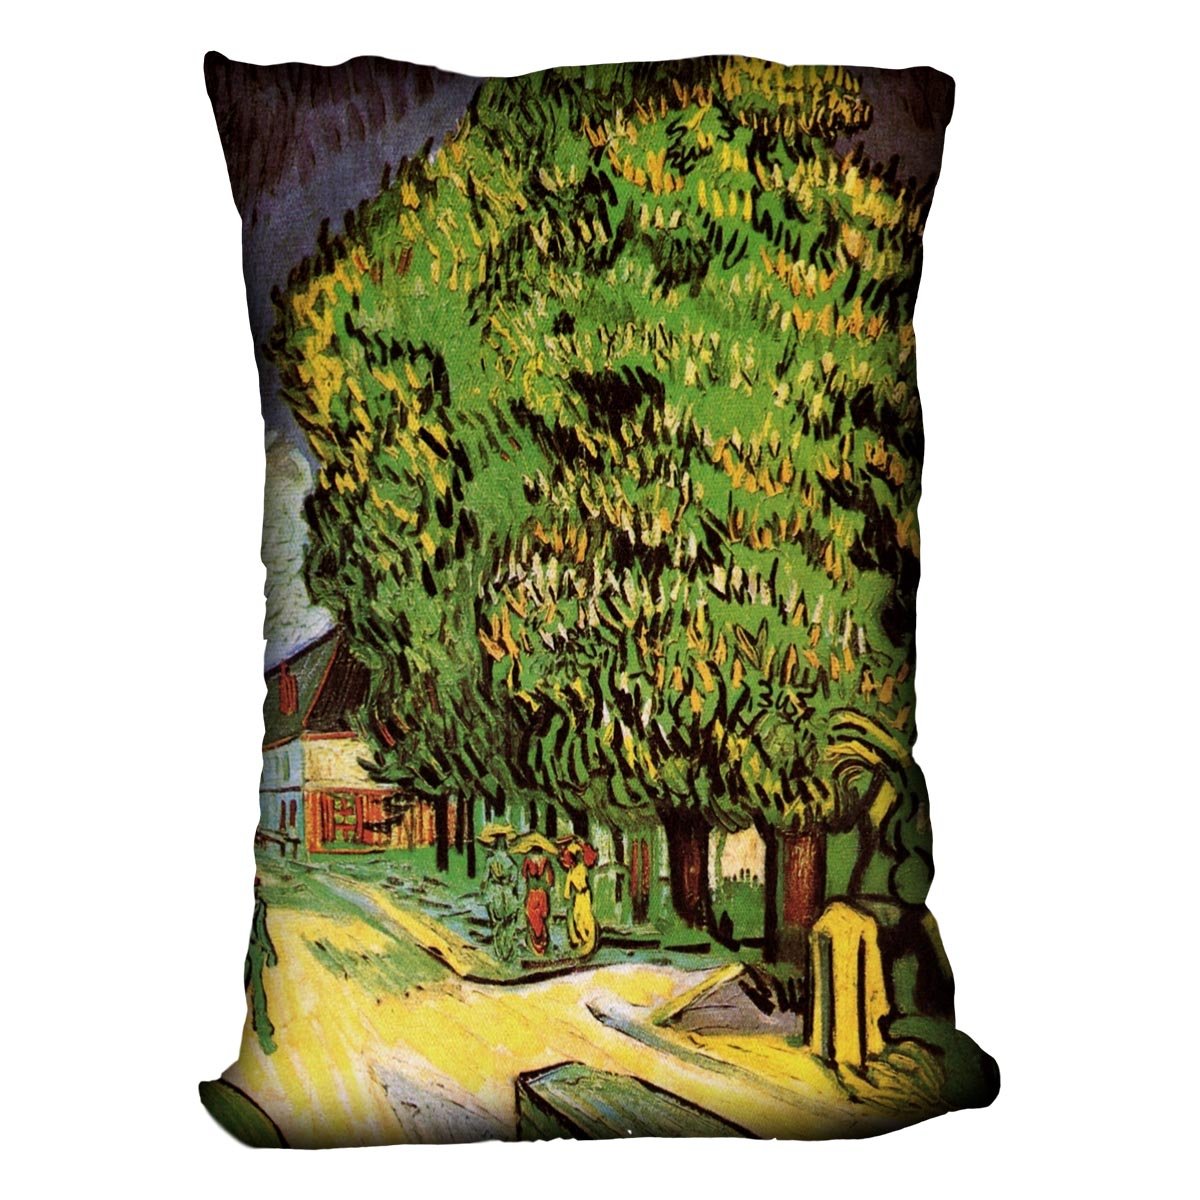 Chestnut Trees in Blossom by Van Gogh Throw Pillow